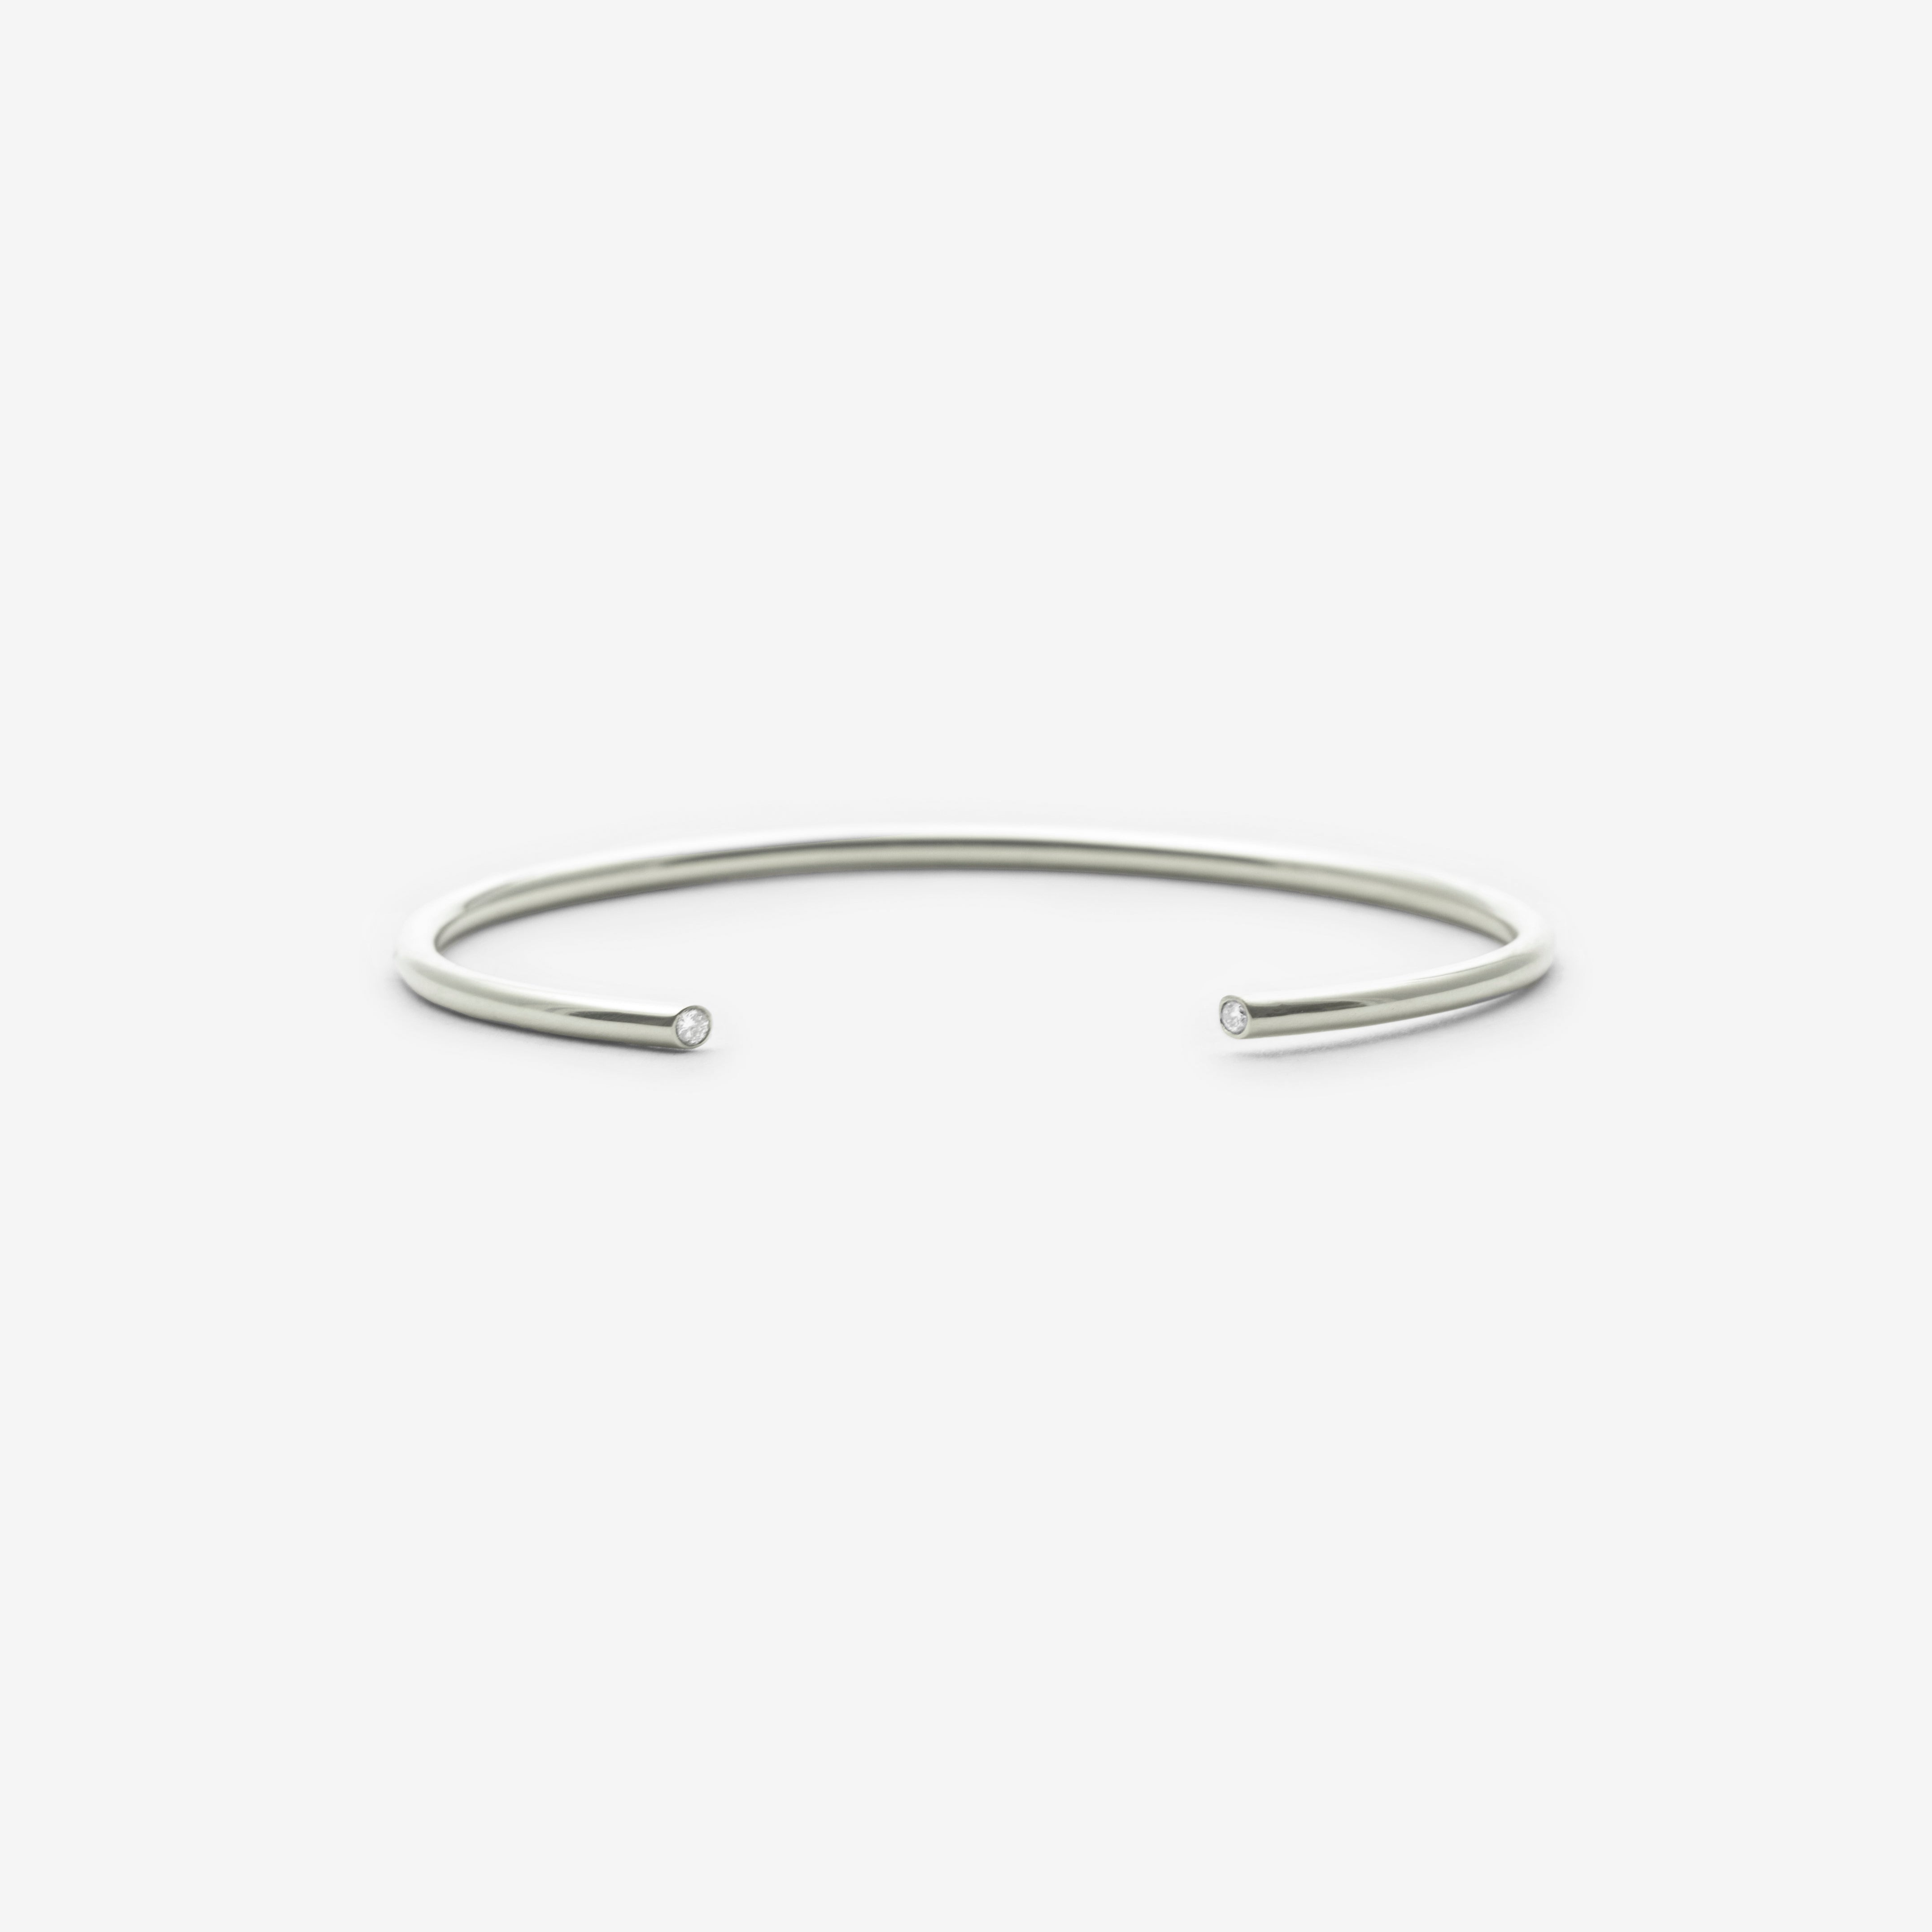 Olva Simple Cuff in 14k White Gold set with White Diamonds By SHW Fine Jewelry NYC